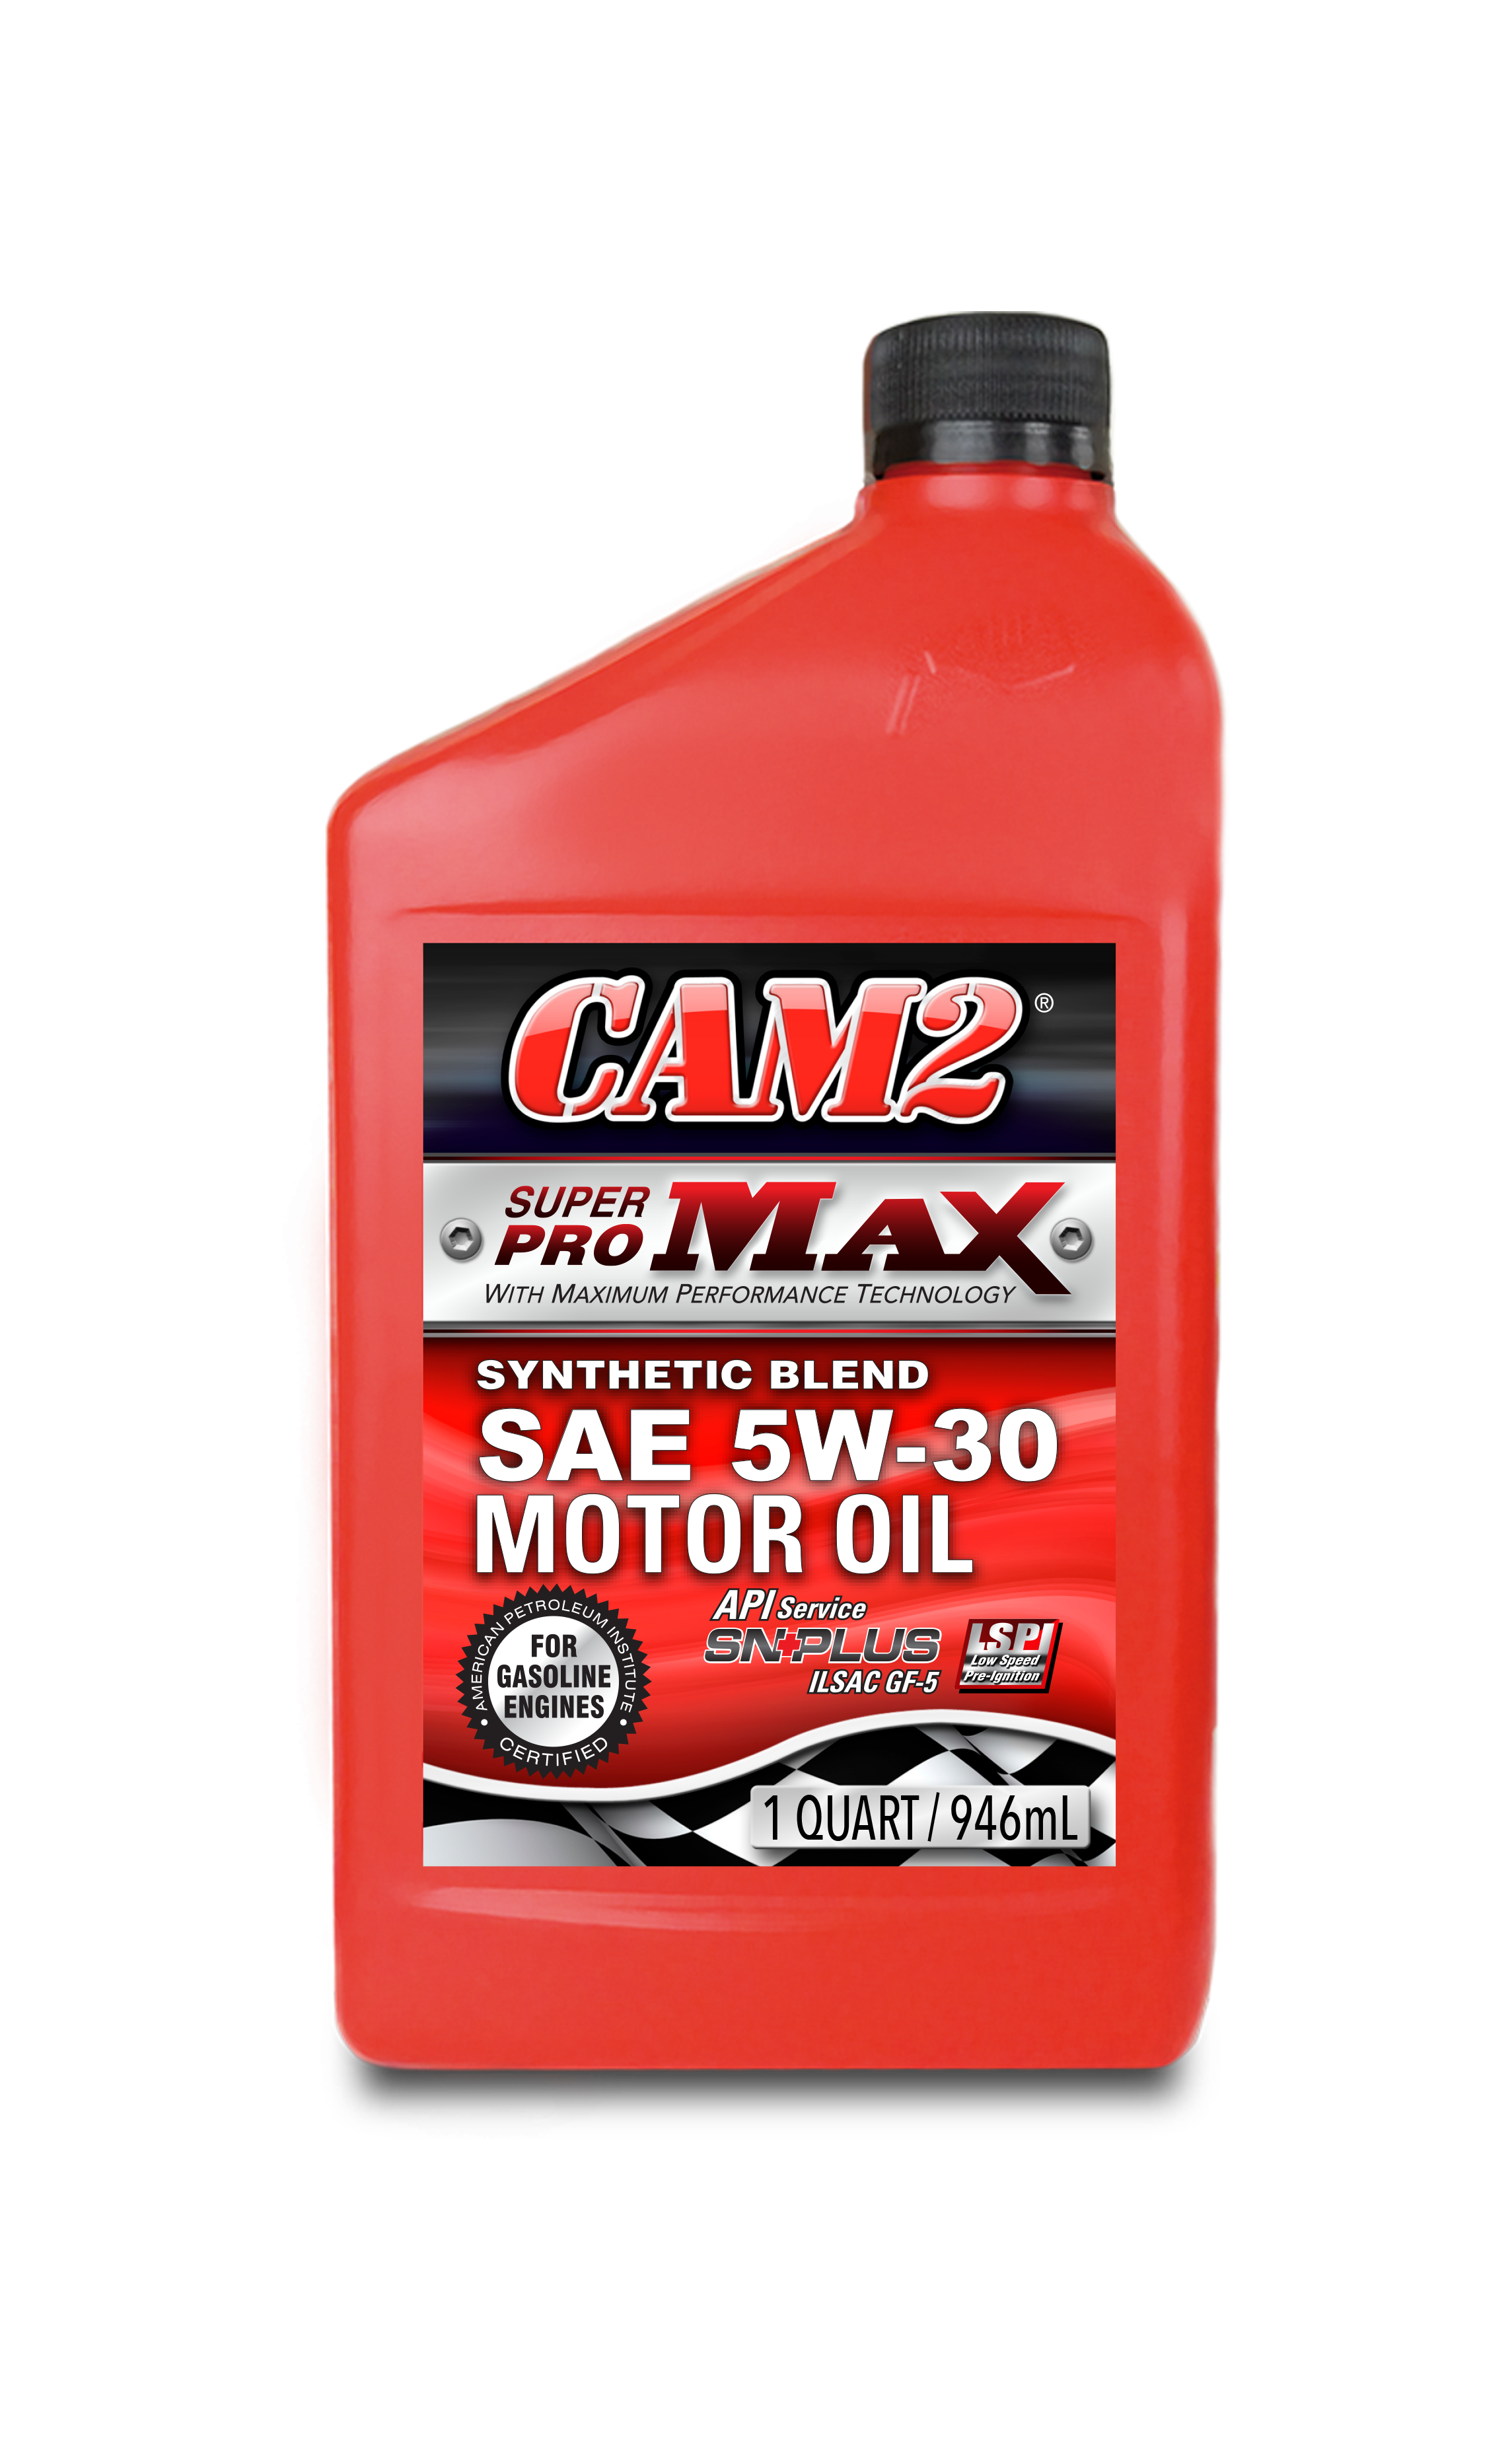 CAM2 SUPERPRO MAX 5W-30 SYNTHETIC BLEND MOTOR OIL 80565-409